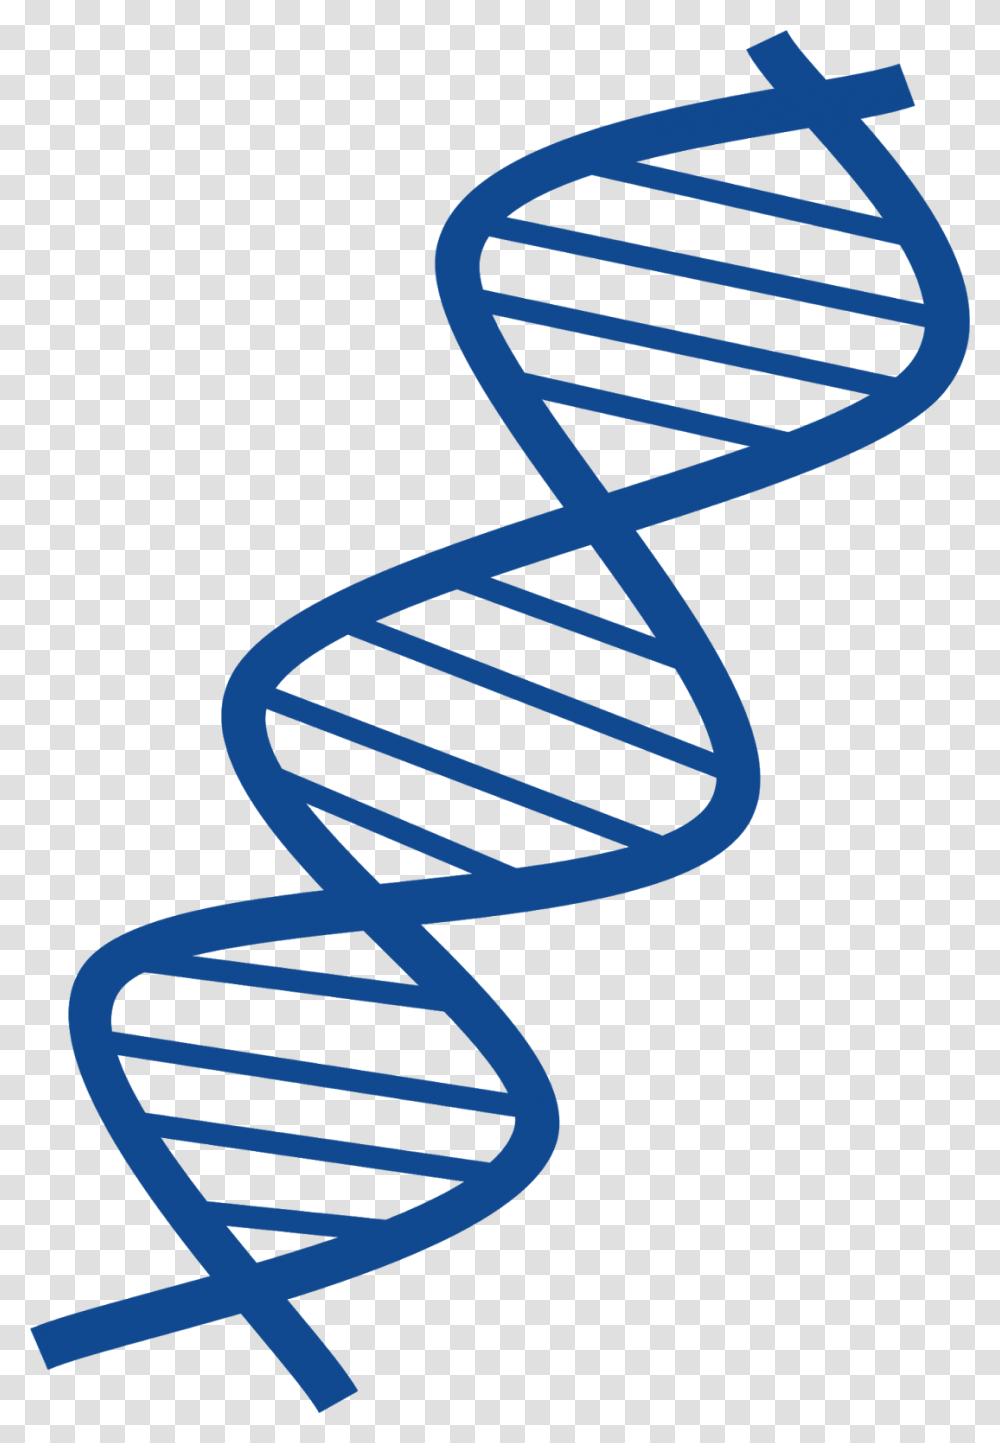 Thin And Blue Dna Image Dna Clipart, Spiral, Coil, Alphabet Transparent Png